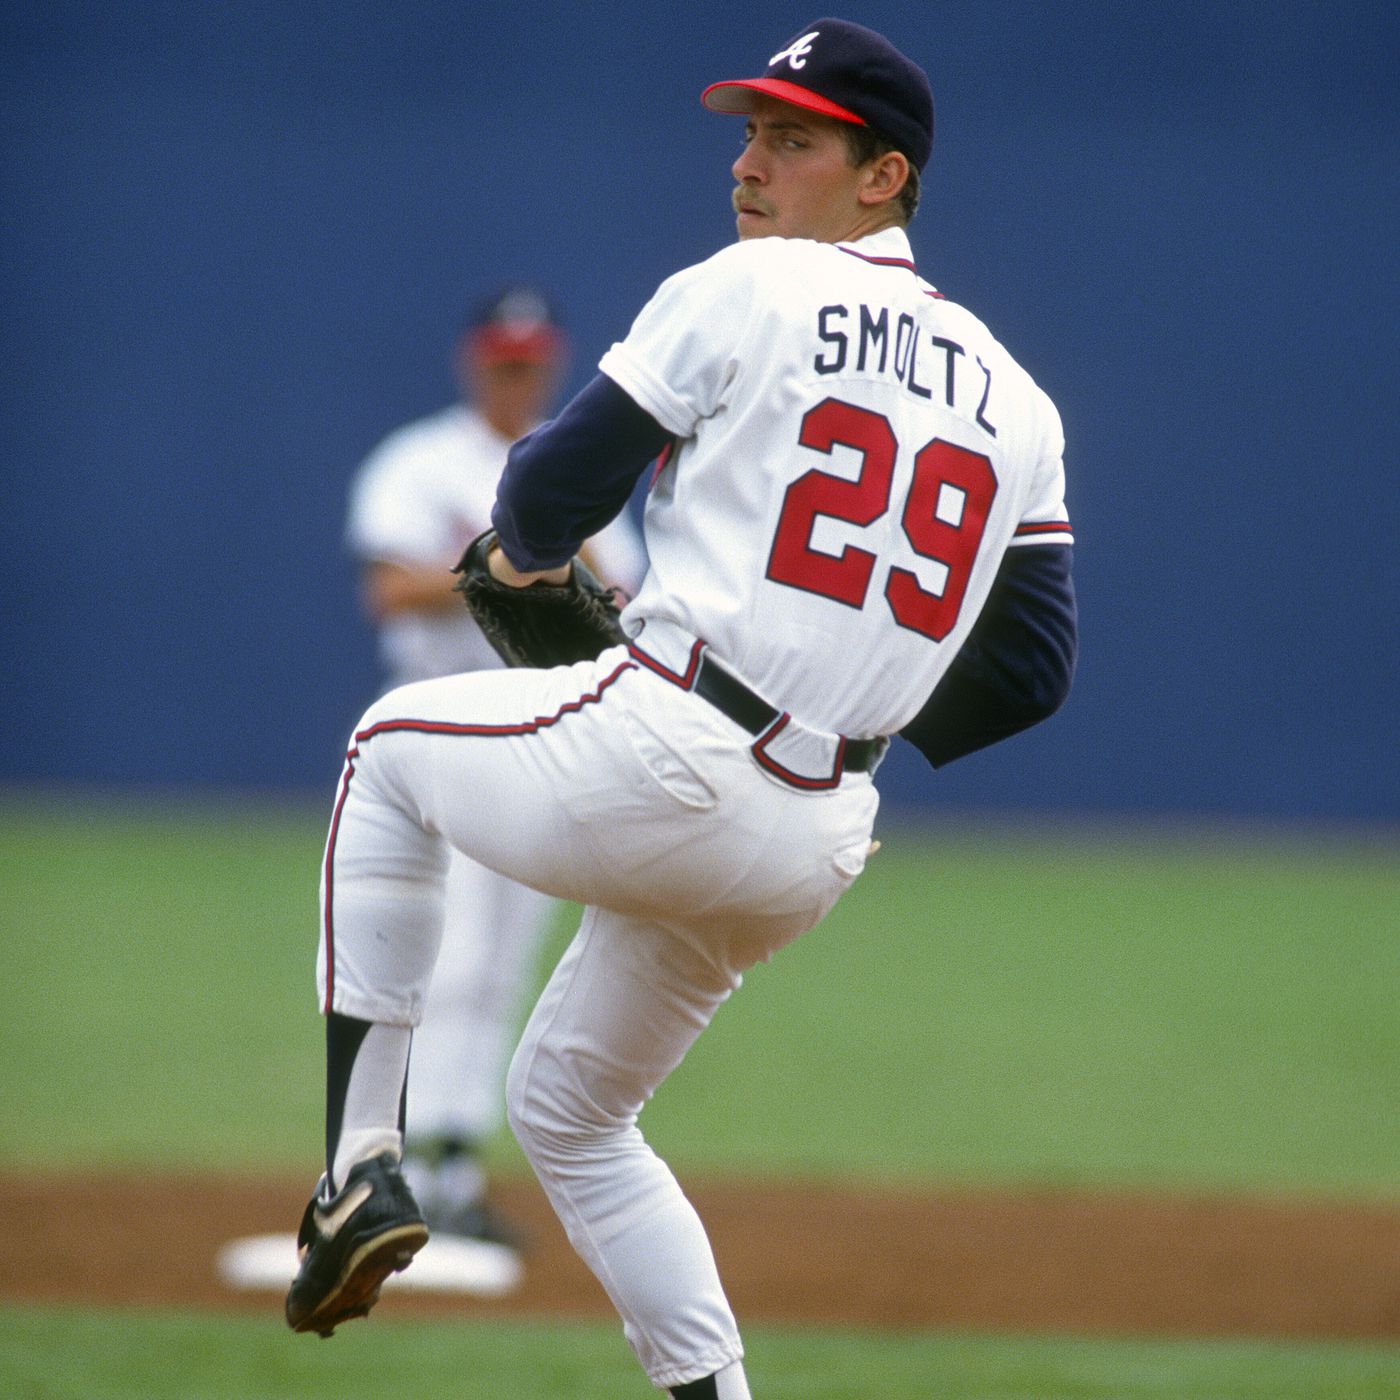 This Day in Braves History: John Smoltz strikes out 15 in win over